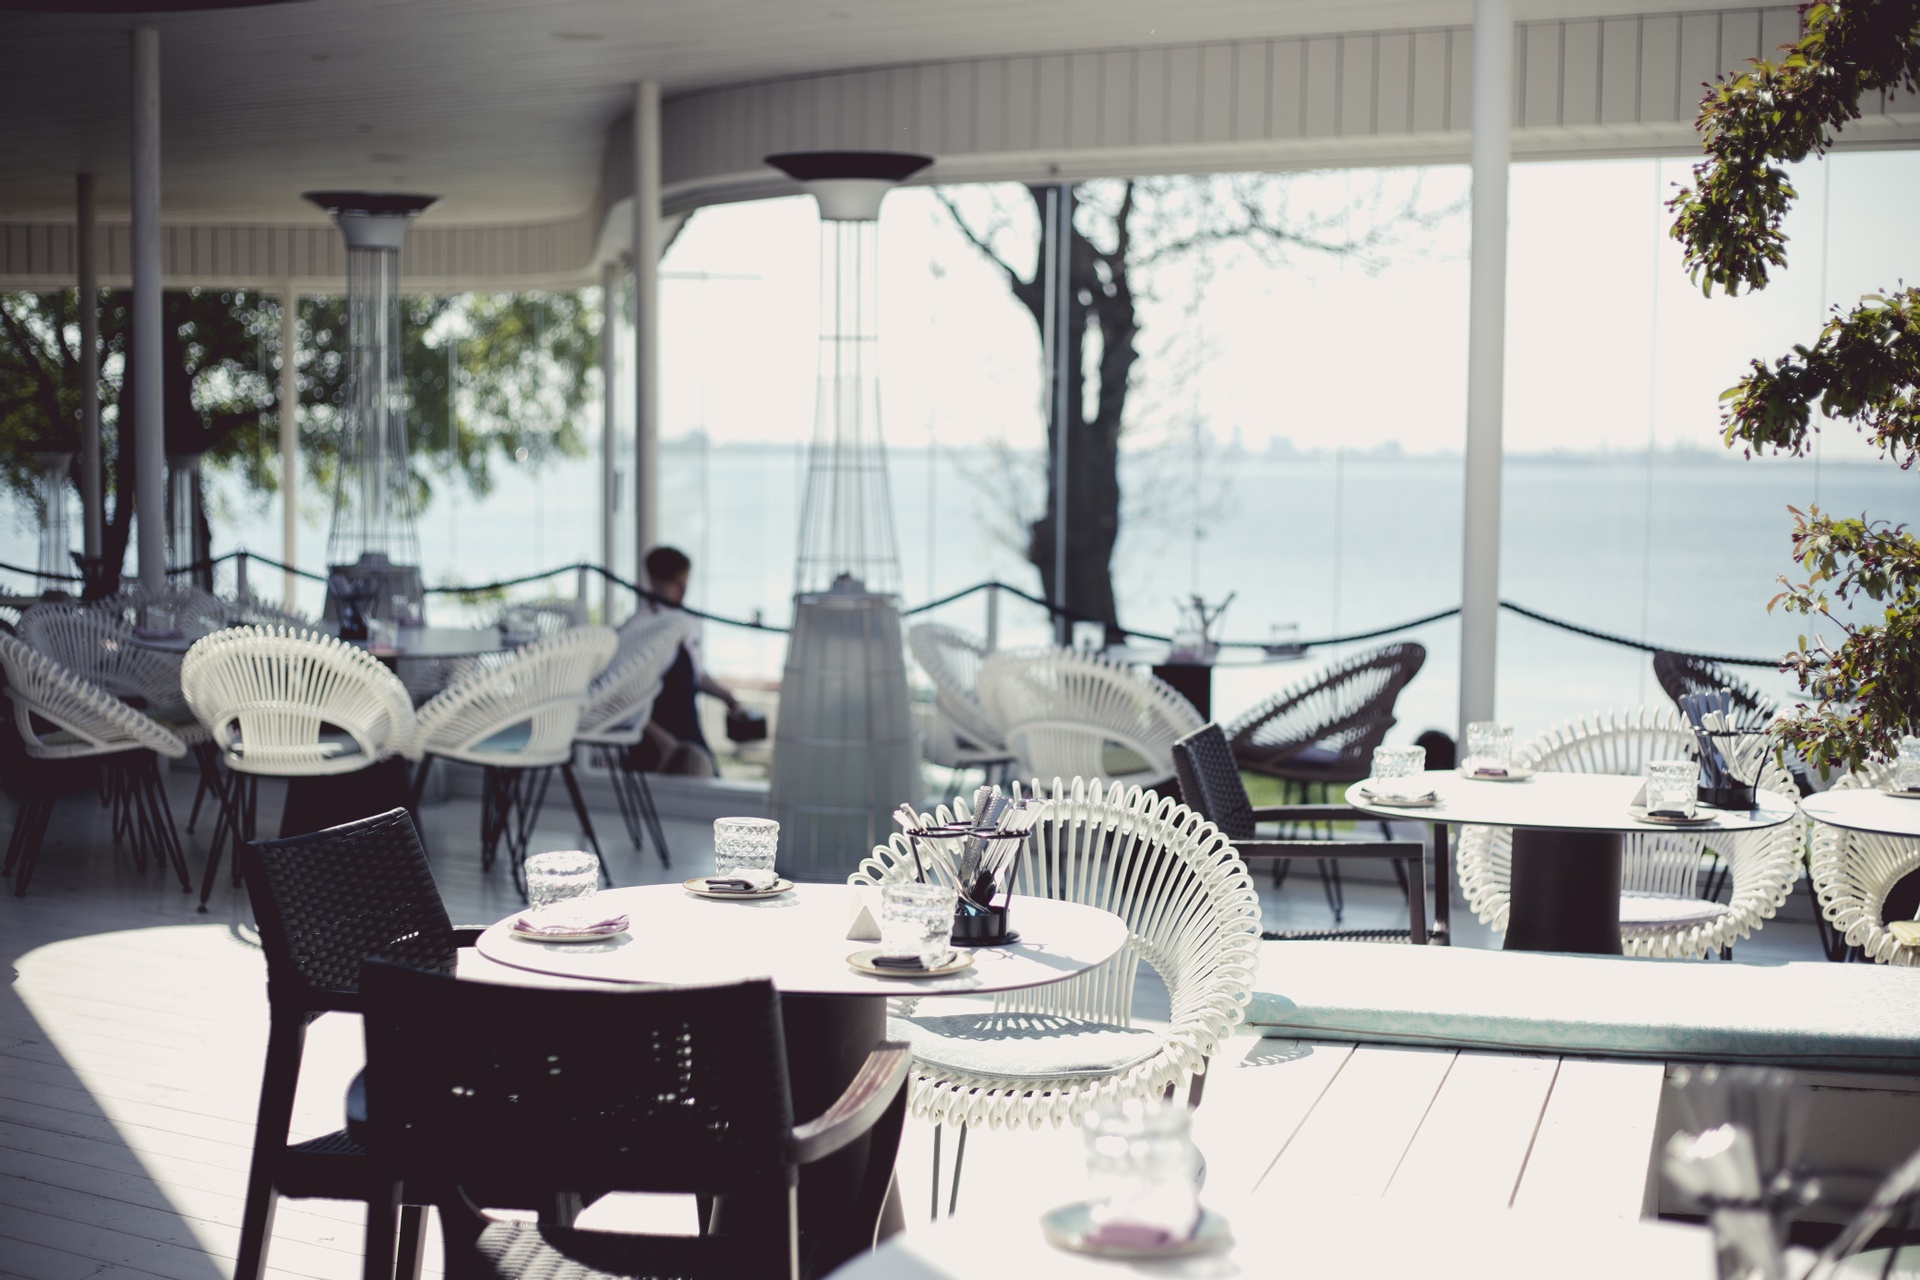 Delightful dining along the Baltic Coast